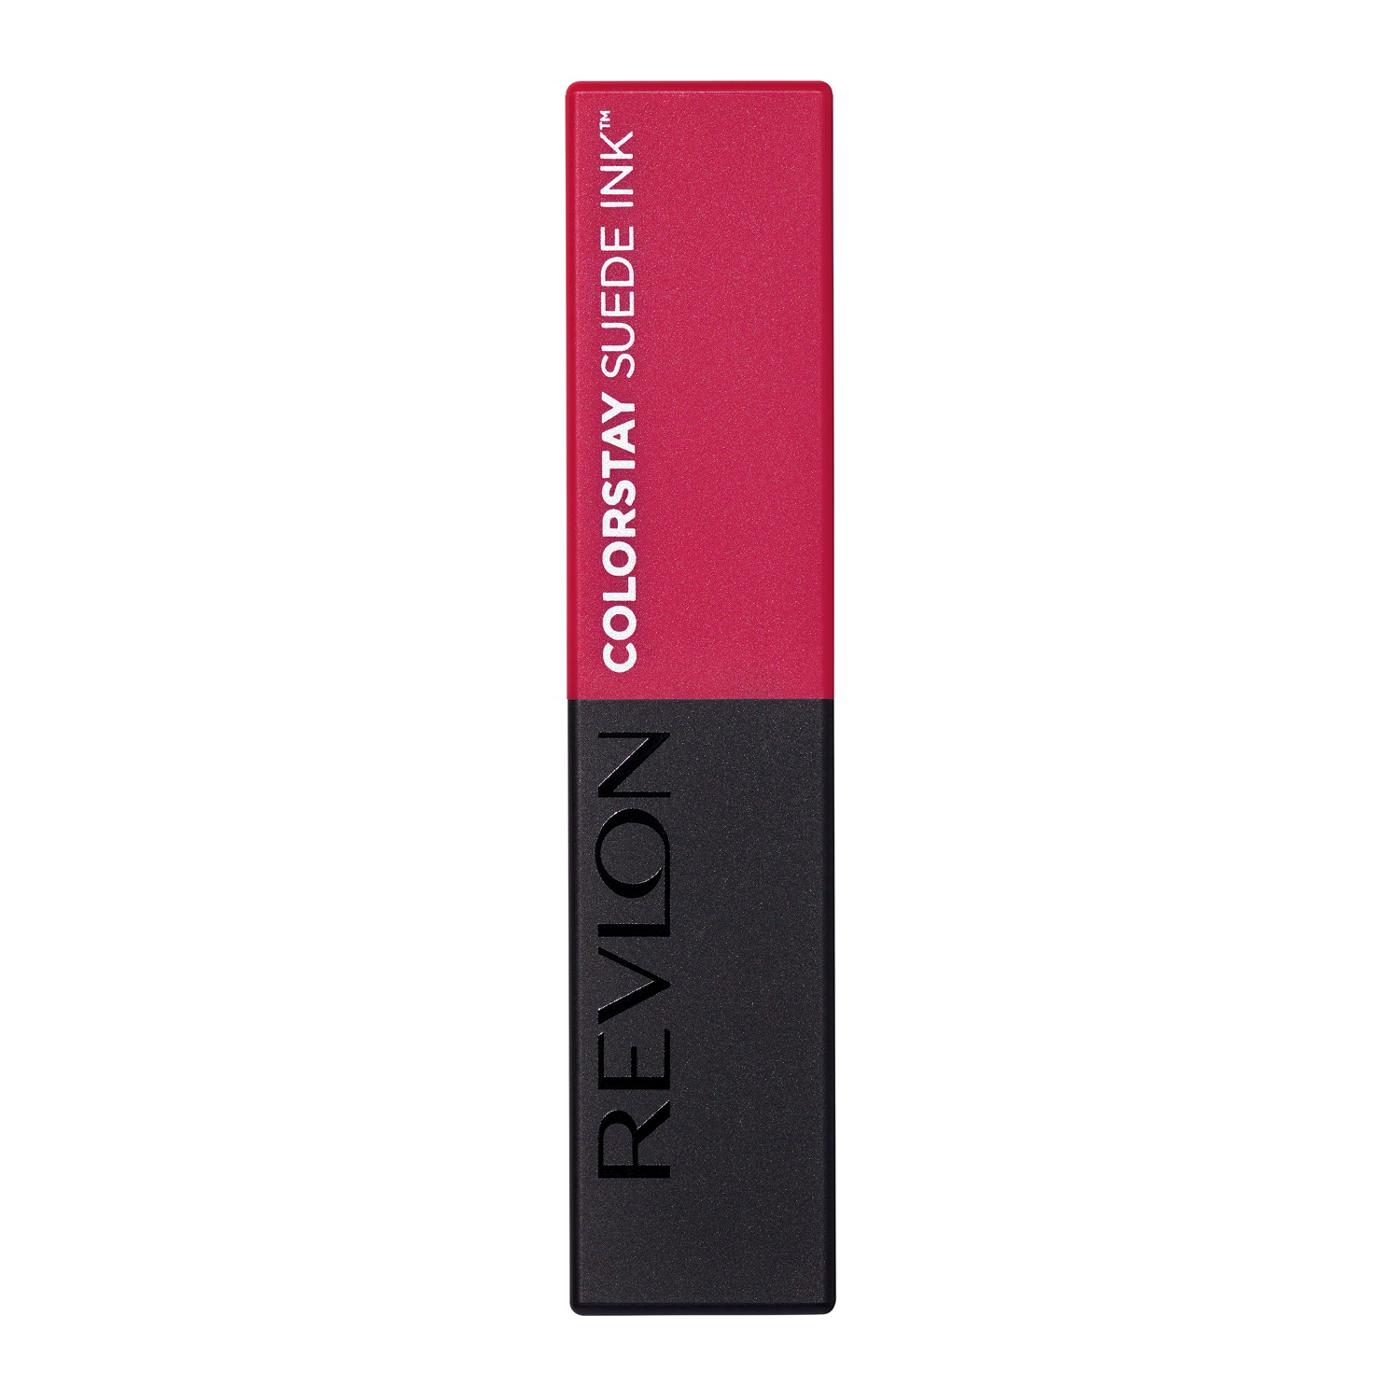 Revlon ColorStay Suede Ink Lipstick - Type A; image 1 of 5